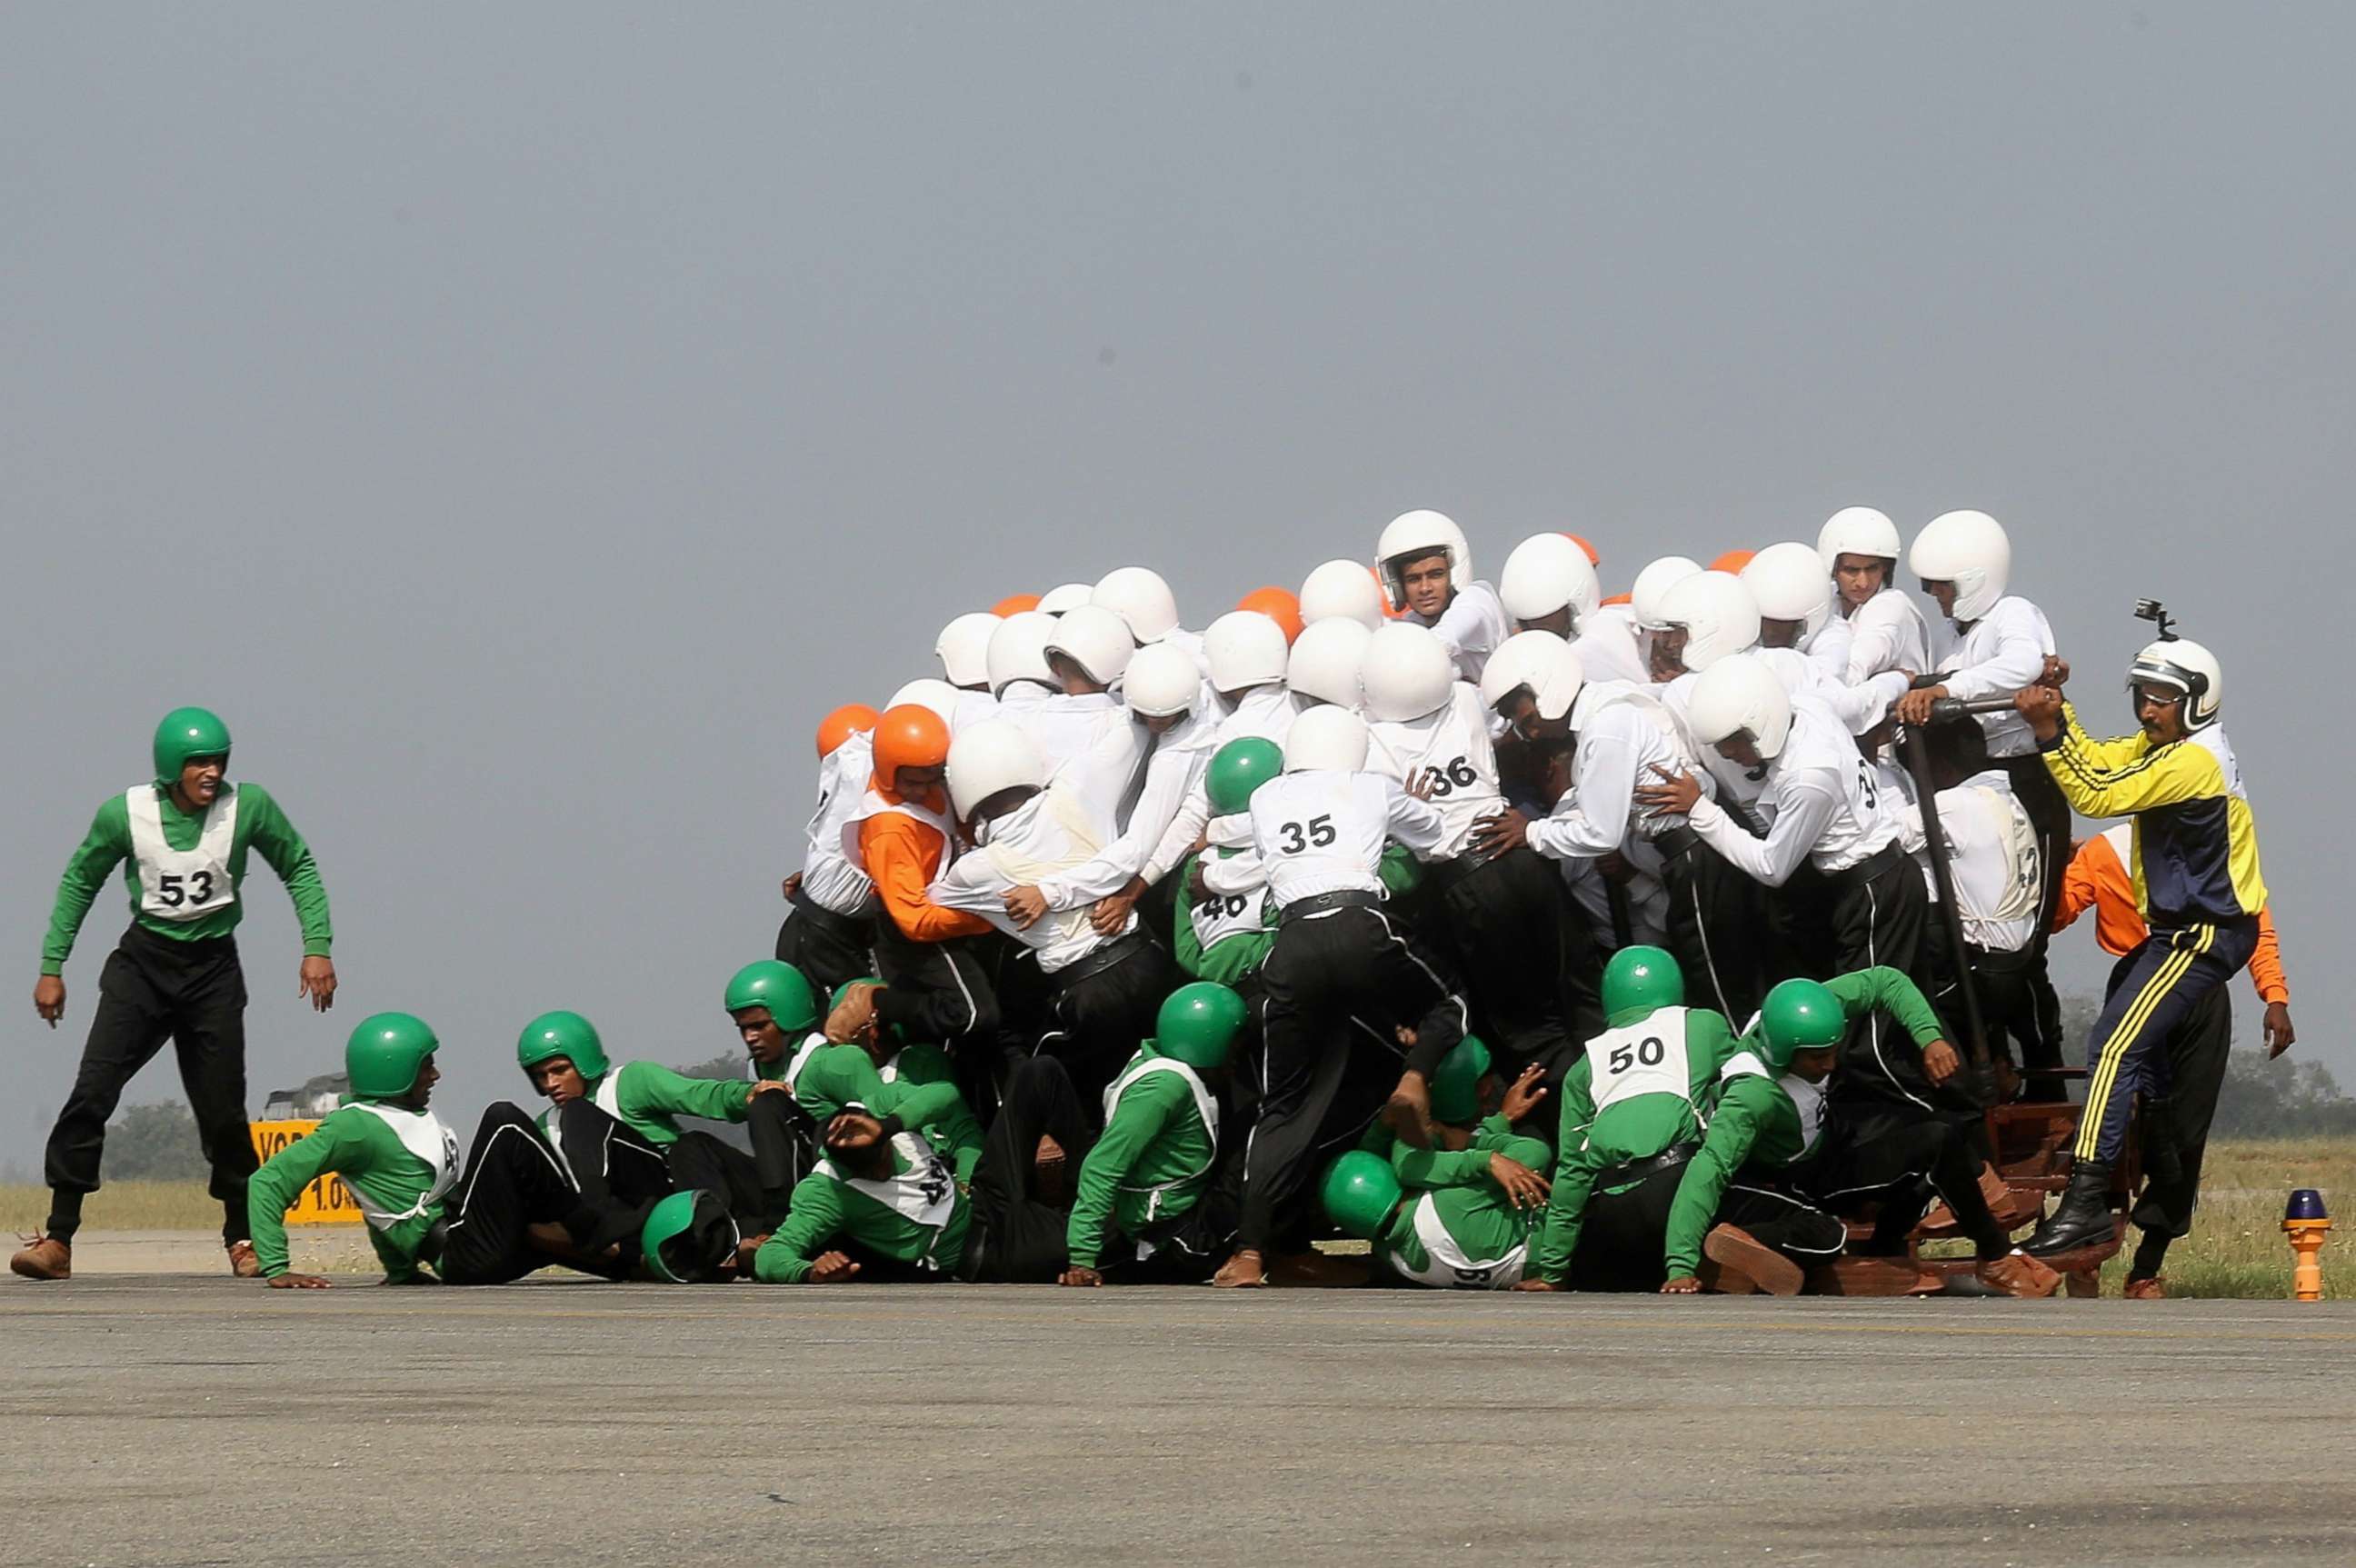 PHOTO: Members of the Army Service Corps motorcycle display team fall off and fail in a first attempt to break a World Record at the Air Force Station Yelahanka, in Bangalore, India, Nov. 19, 2017.